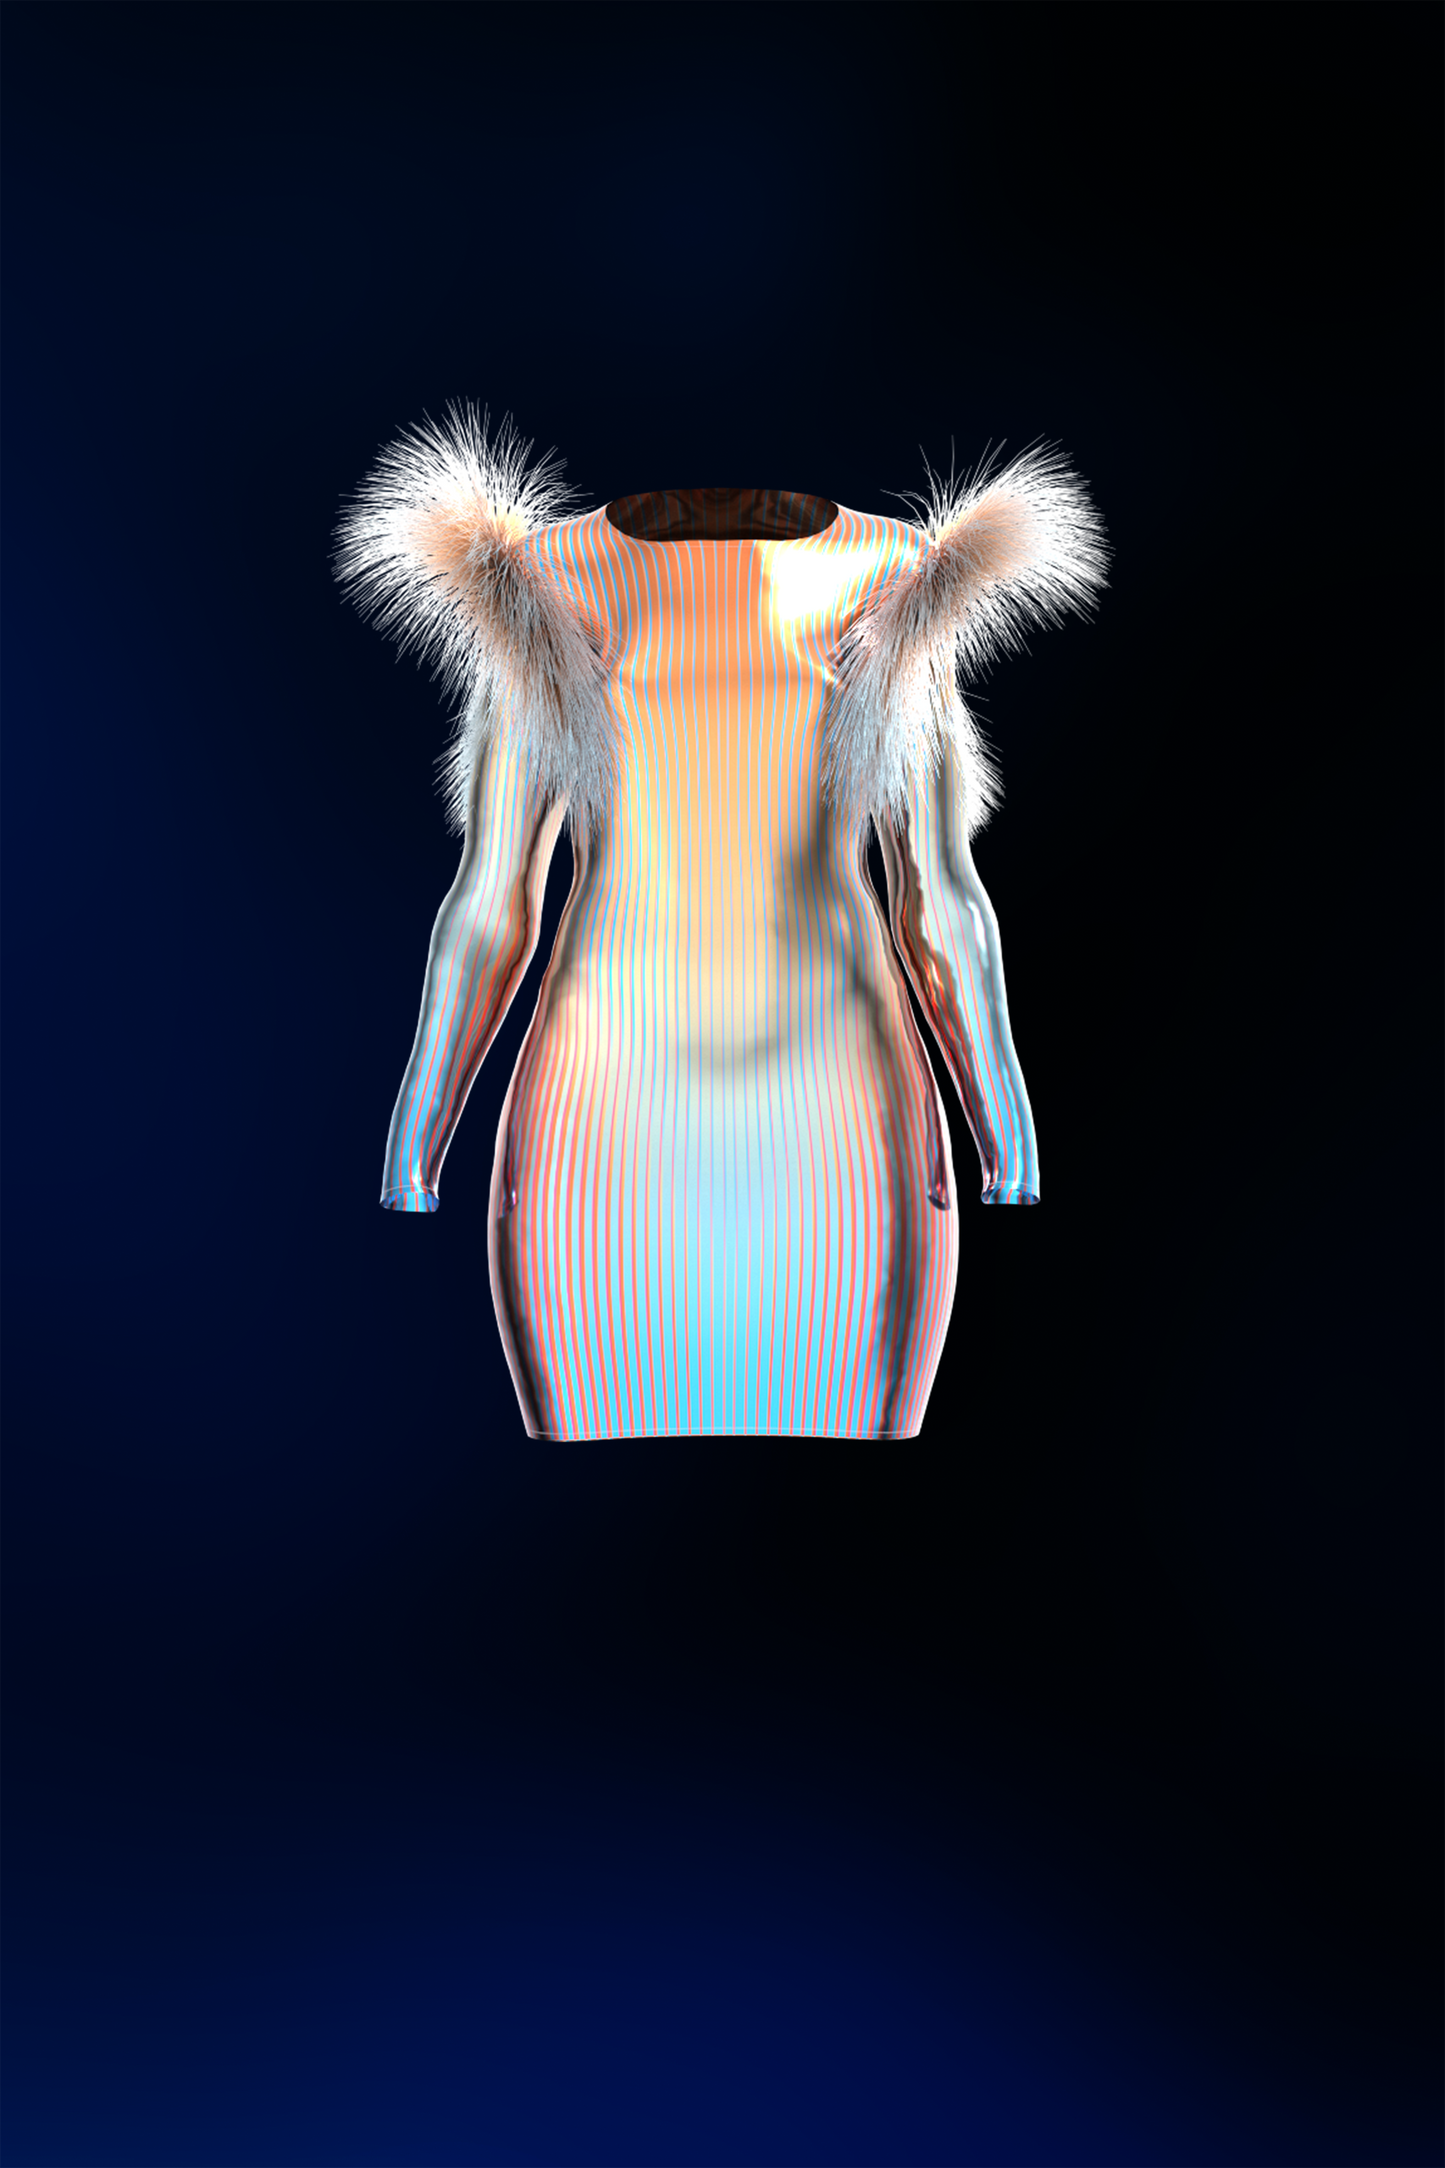 Cannon Metallic Dress With Fur Wing